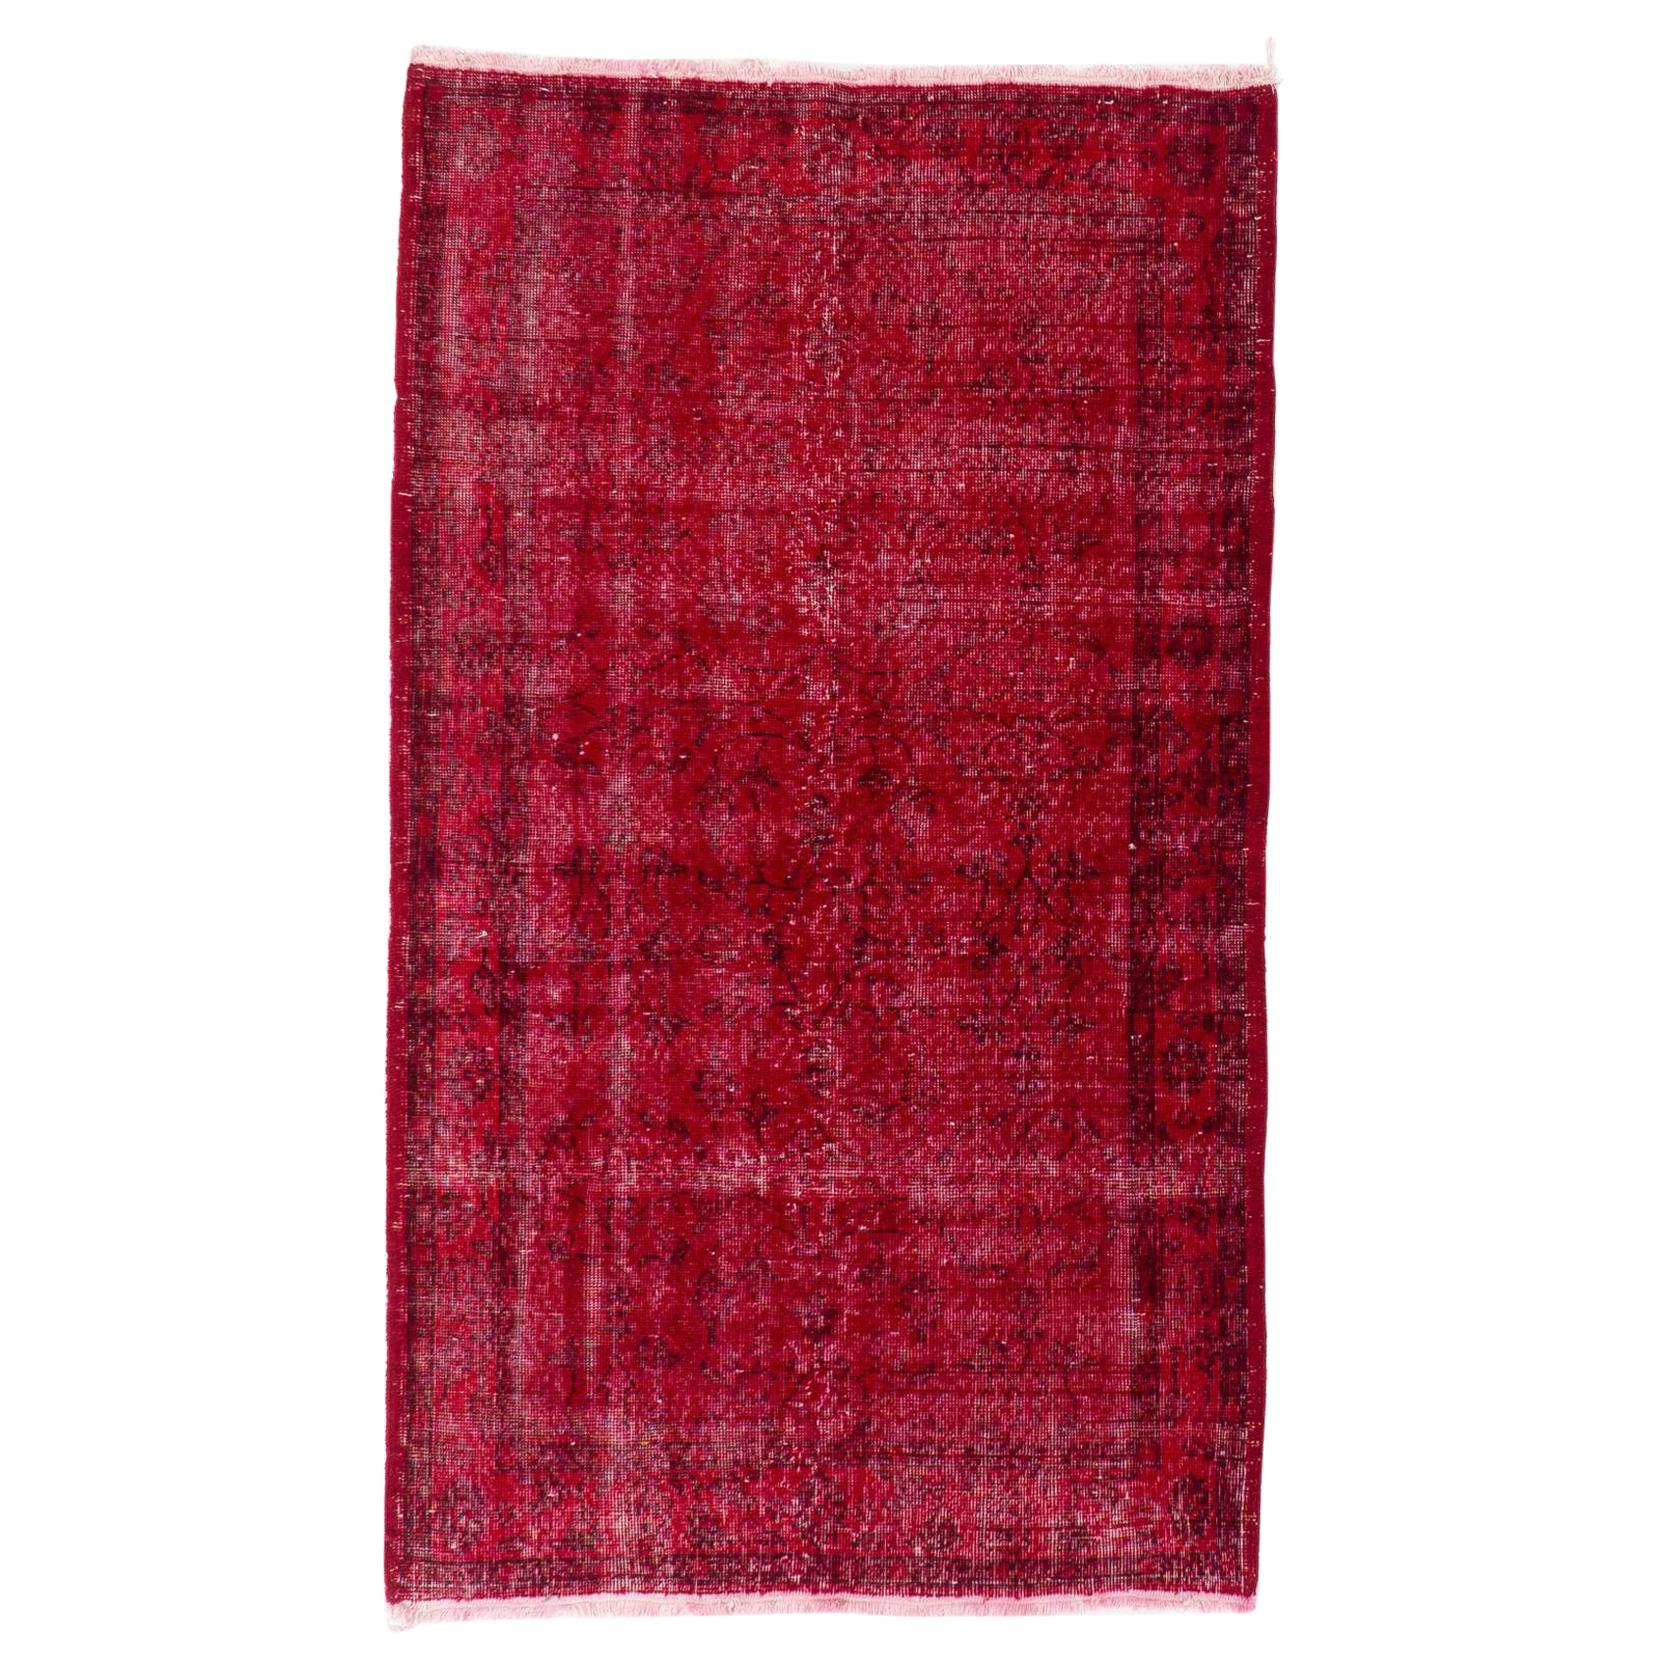 4x7 ft Vintage Handmade Turkish Accent Rug in Red, Ideal for Modern Interiors